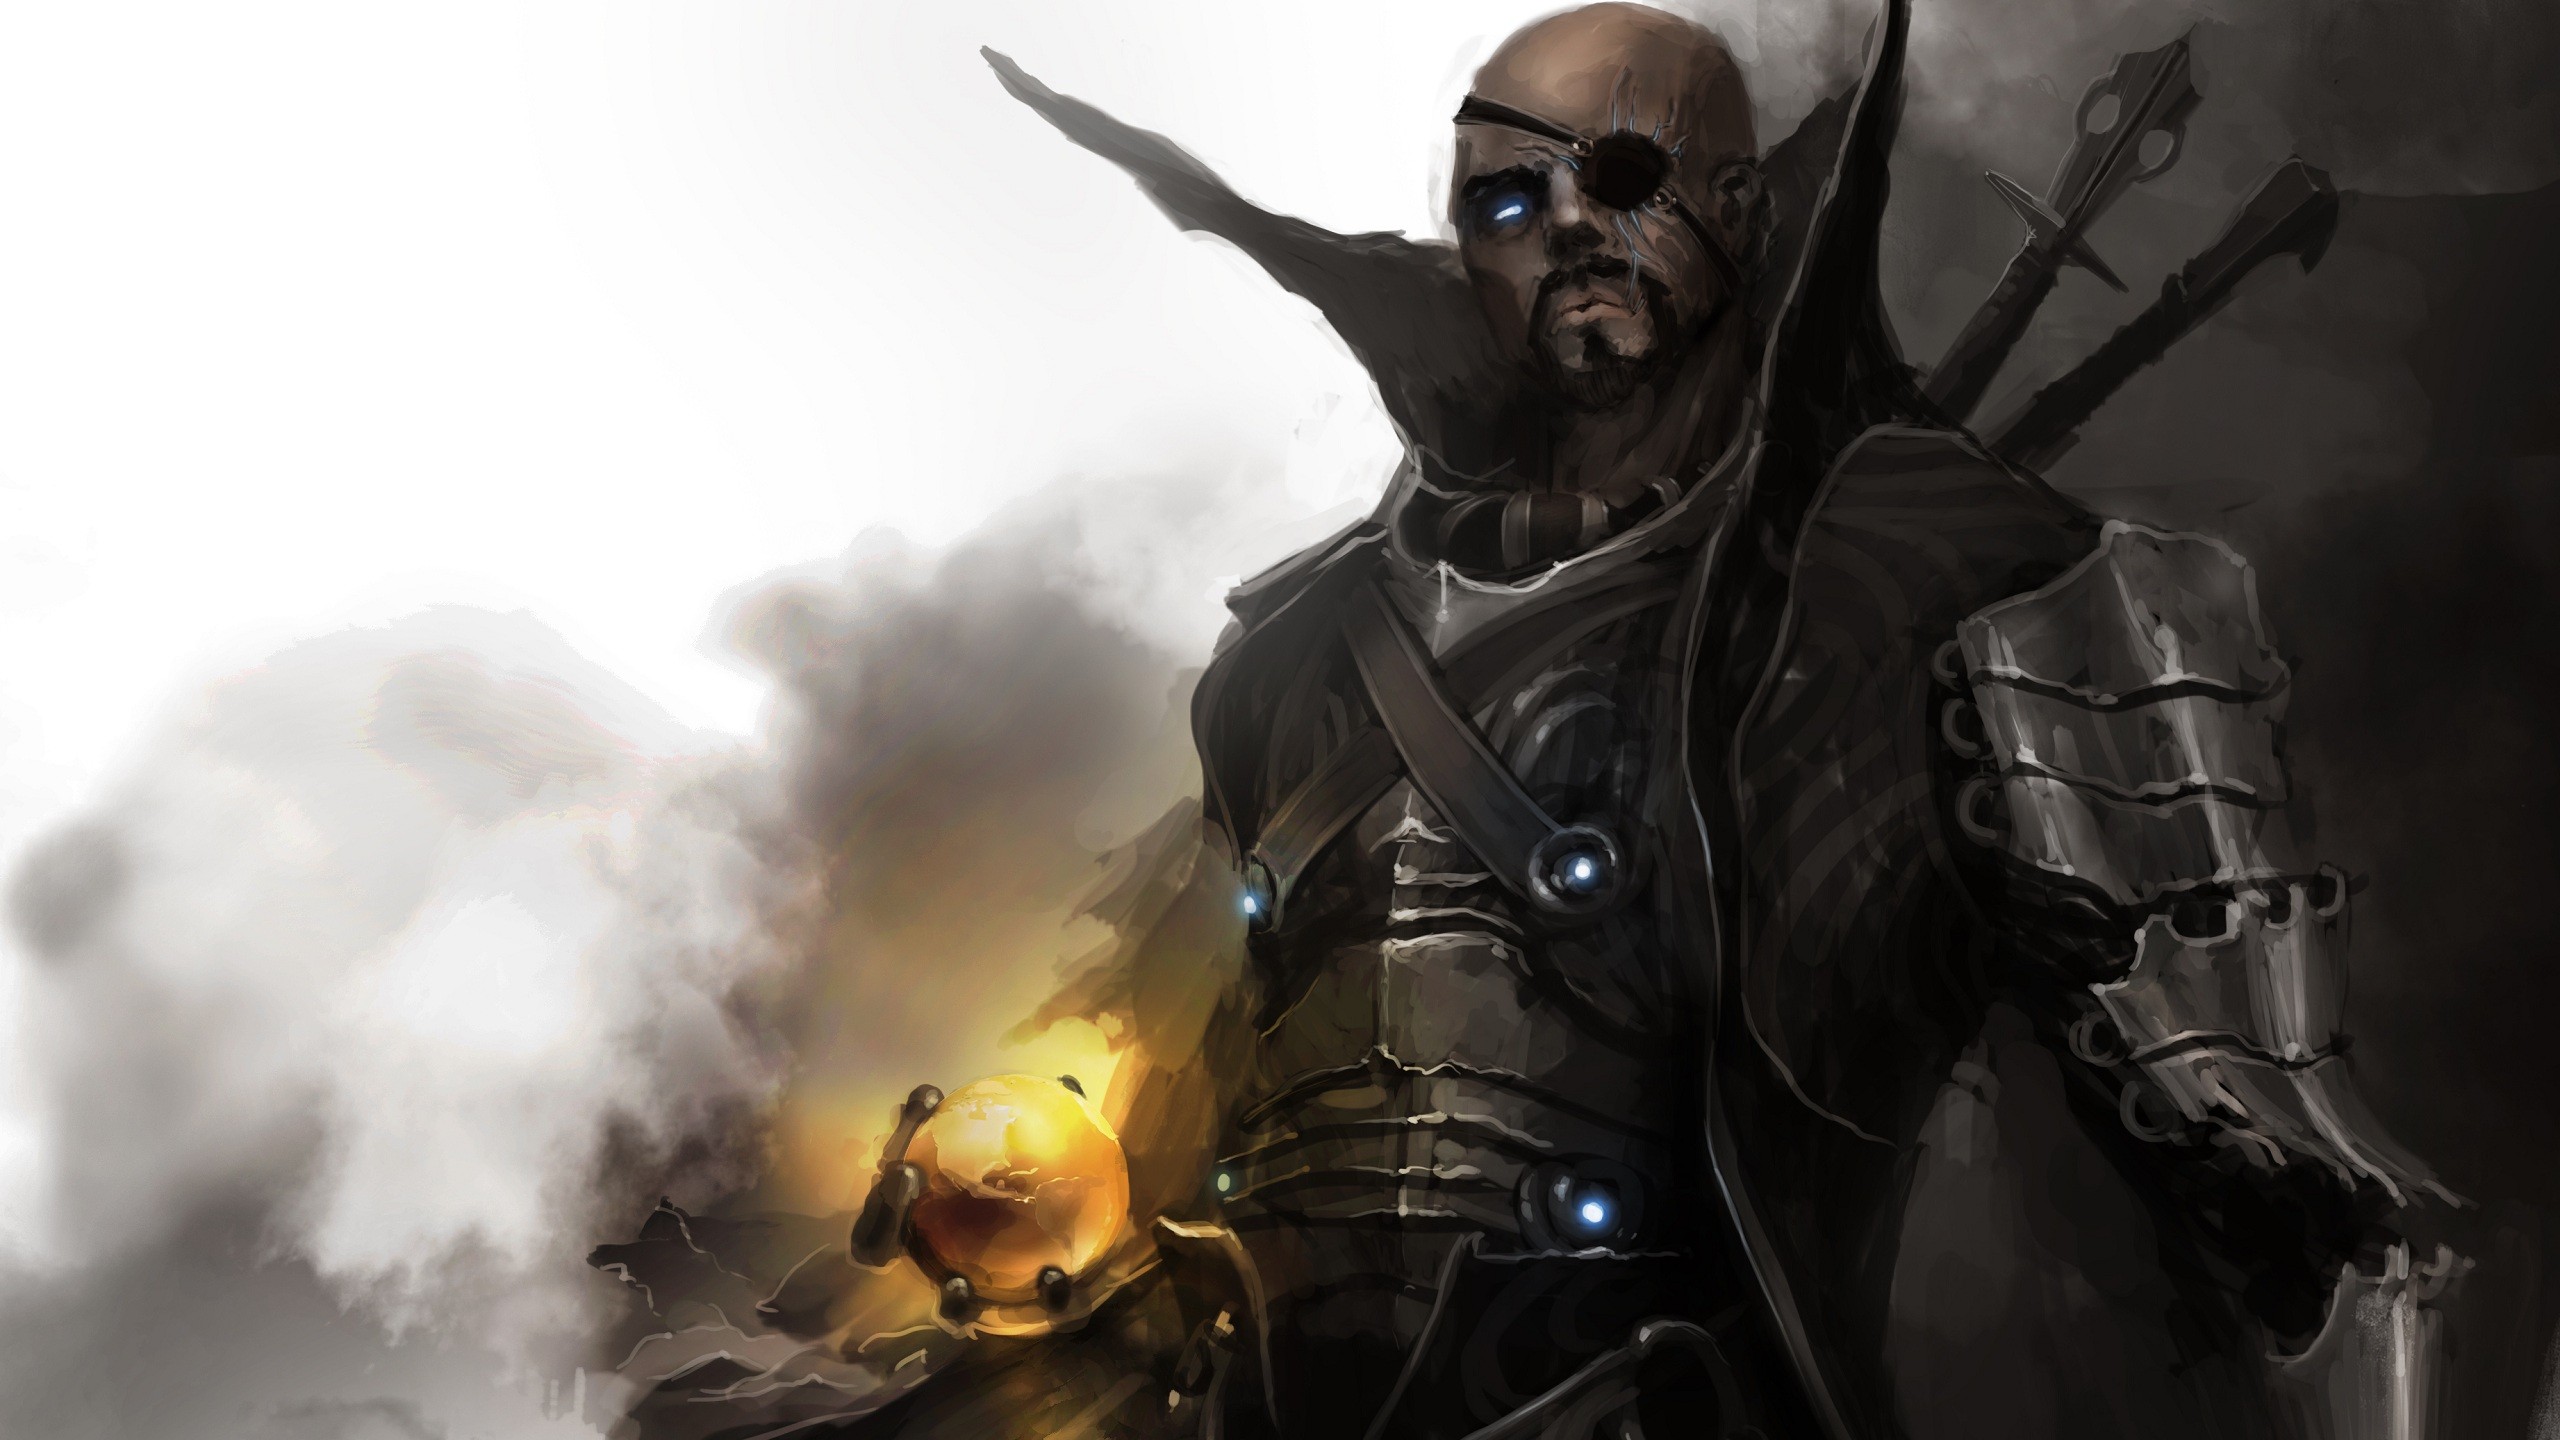 Nice Images Collection: Medieval Nick Fury Desktop Wallpapers